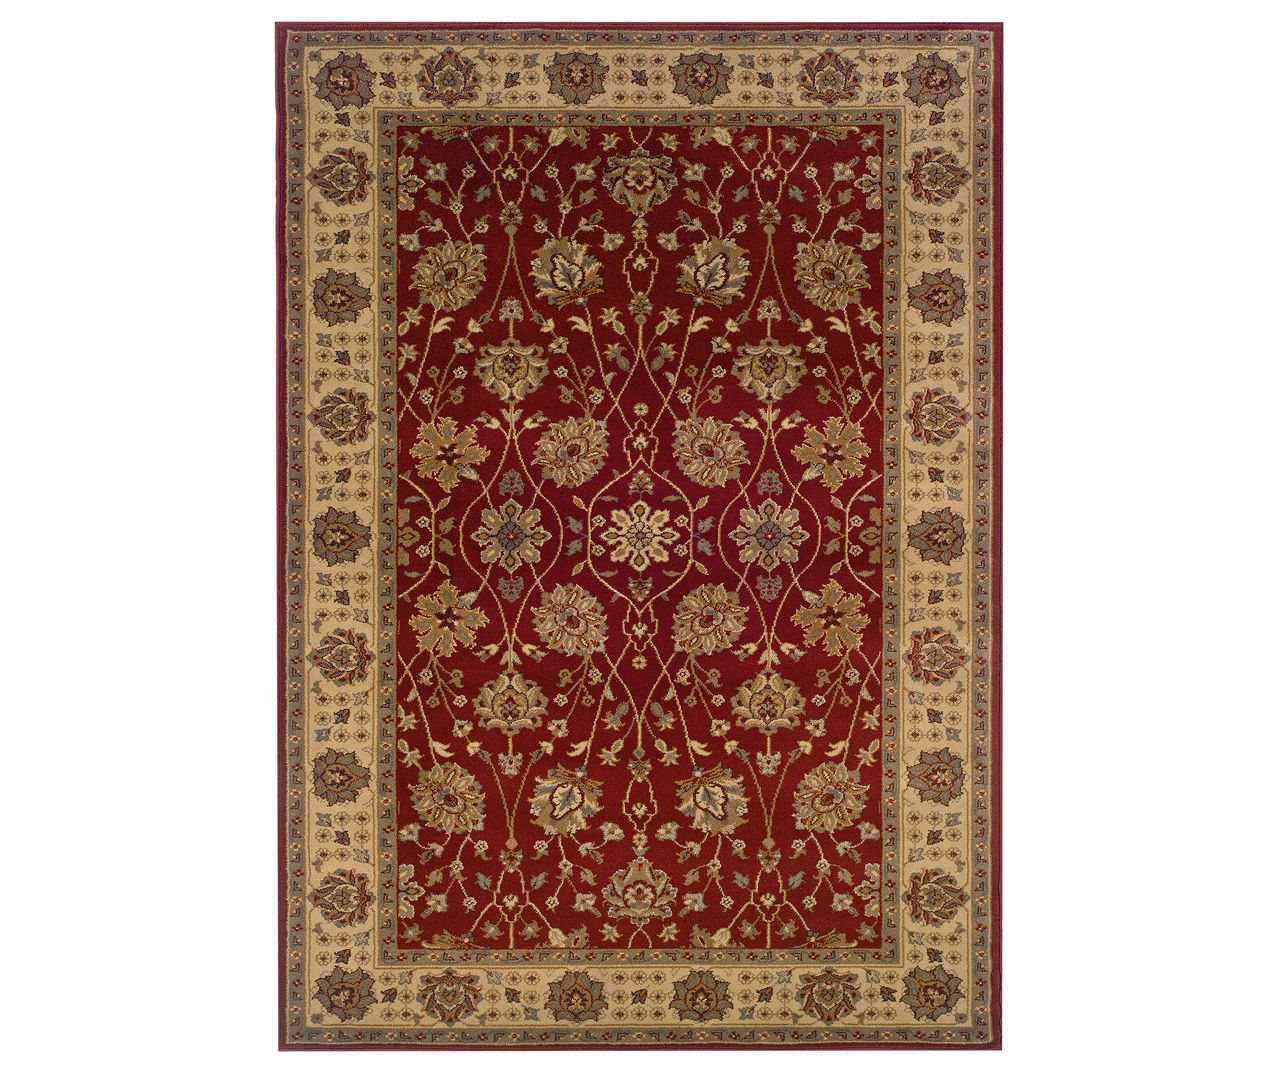 Welsh Red Rugs | Big Lots